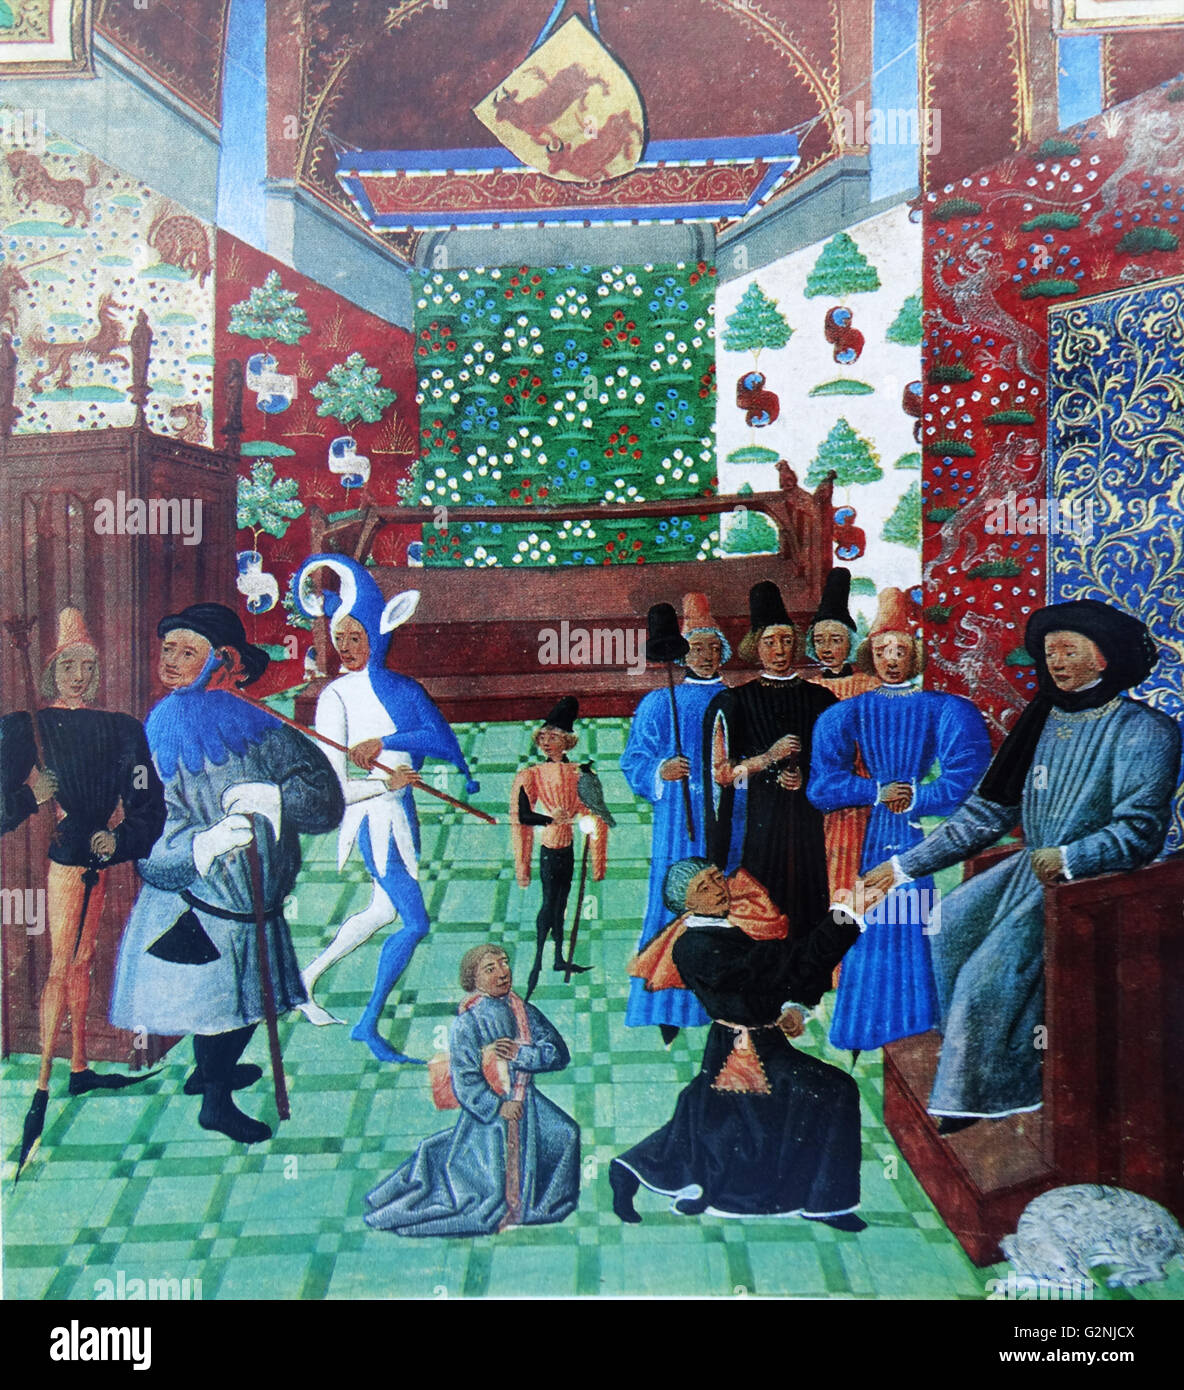 Illumination of the hall in the comte de Foix's castle at Orthez, capital of Bèarn. From Froissart's Chroniques de France et d'Angleterre. Jean Froissart is depicted before the Count, while the page behind carries the book Froissart is presenting. Dated 14th Century Stock Photo